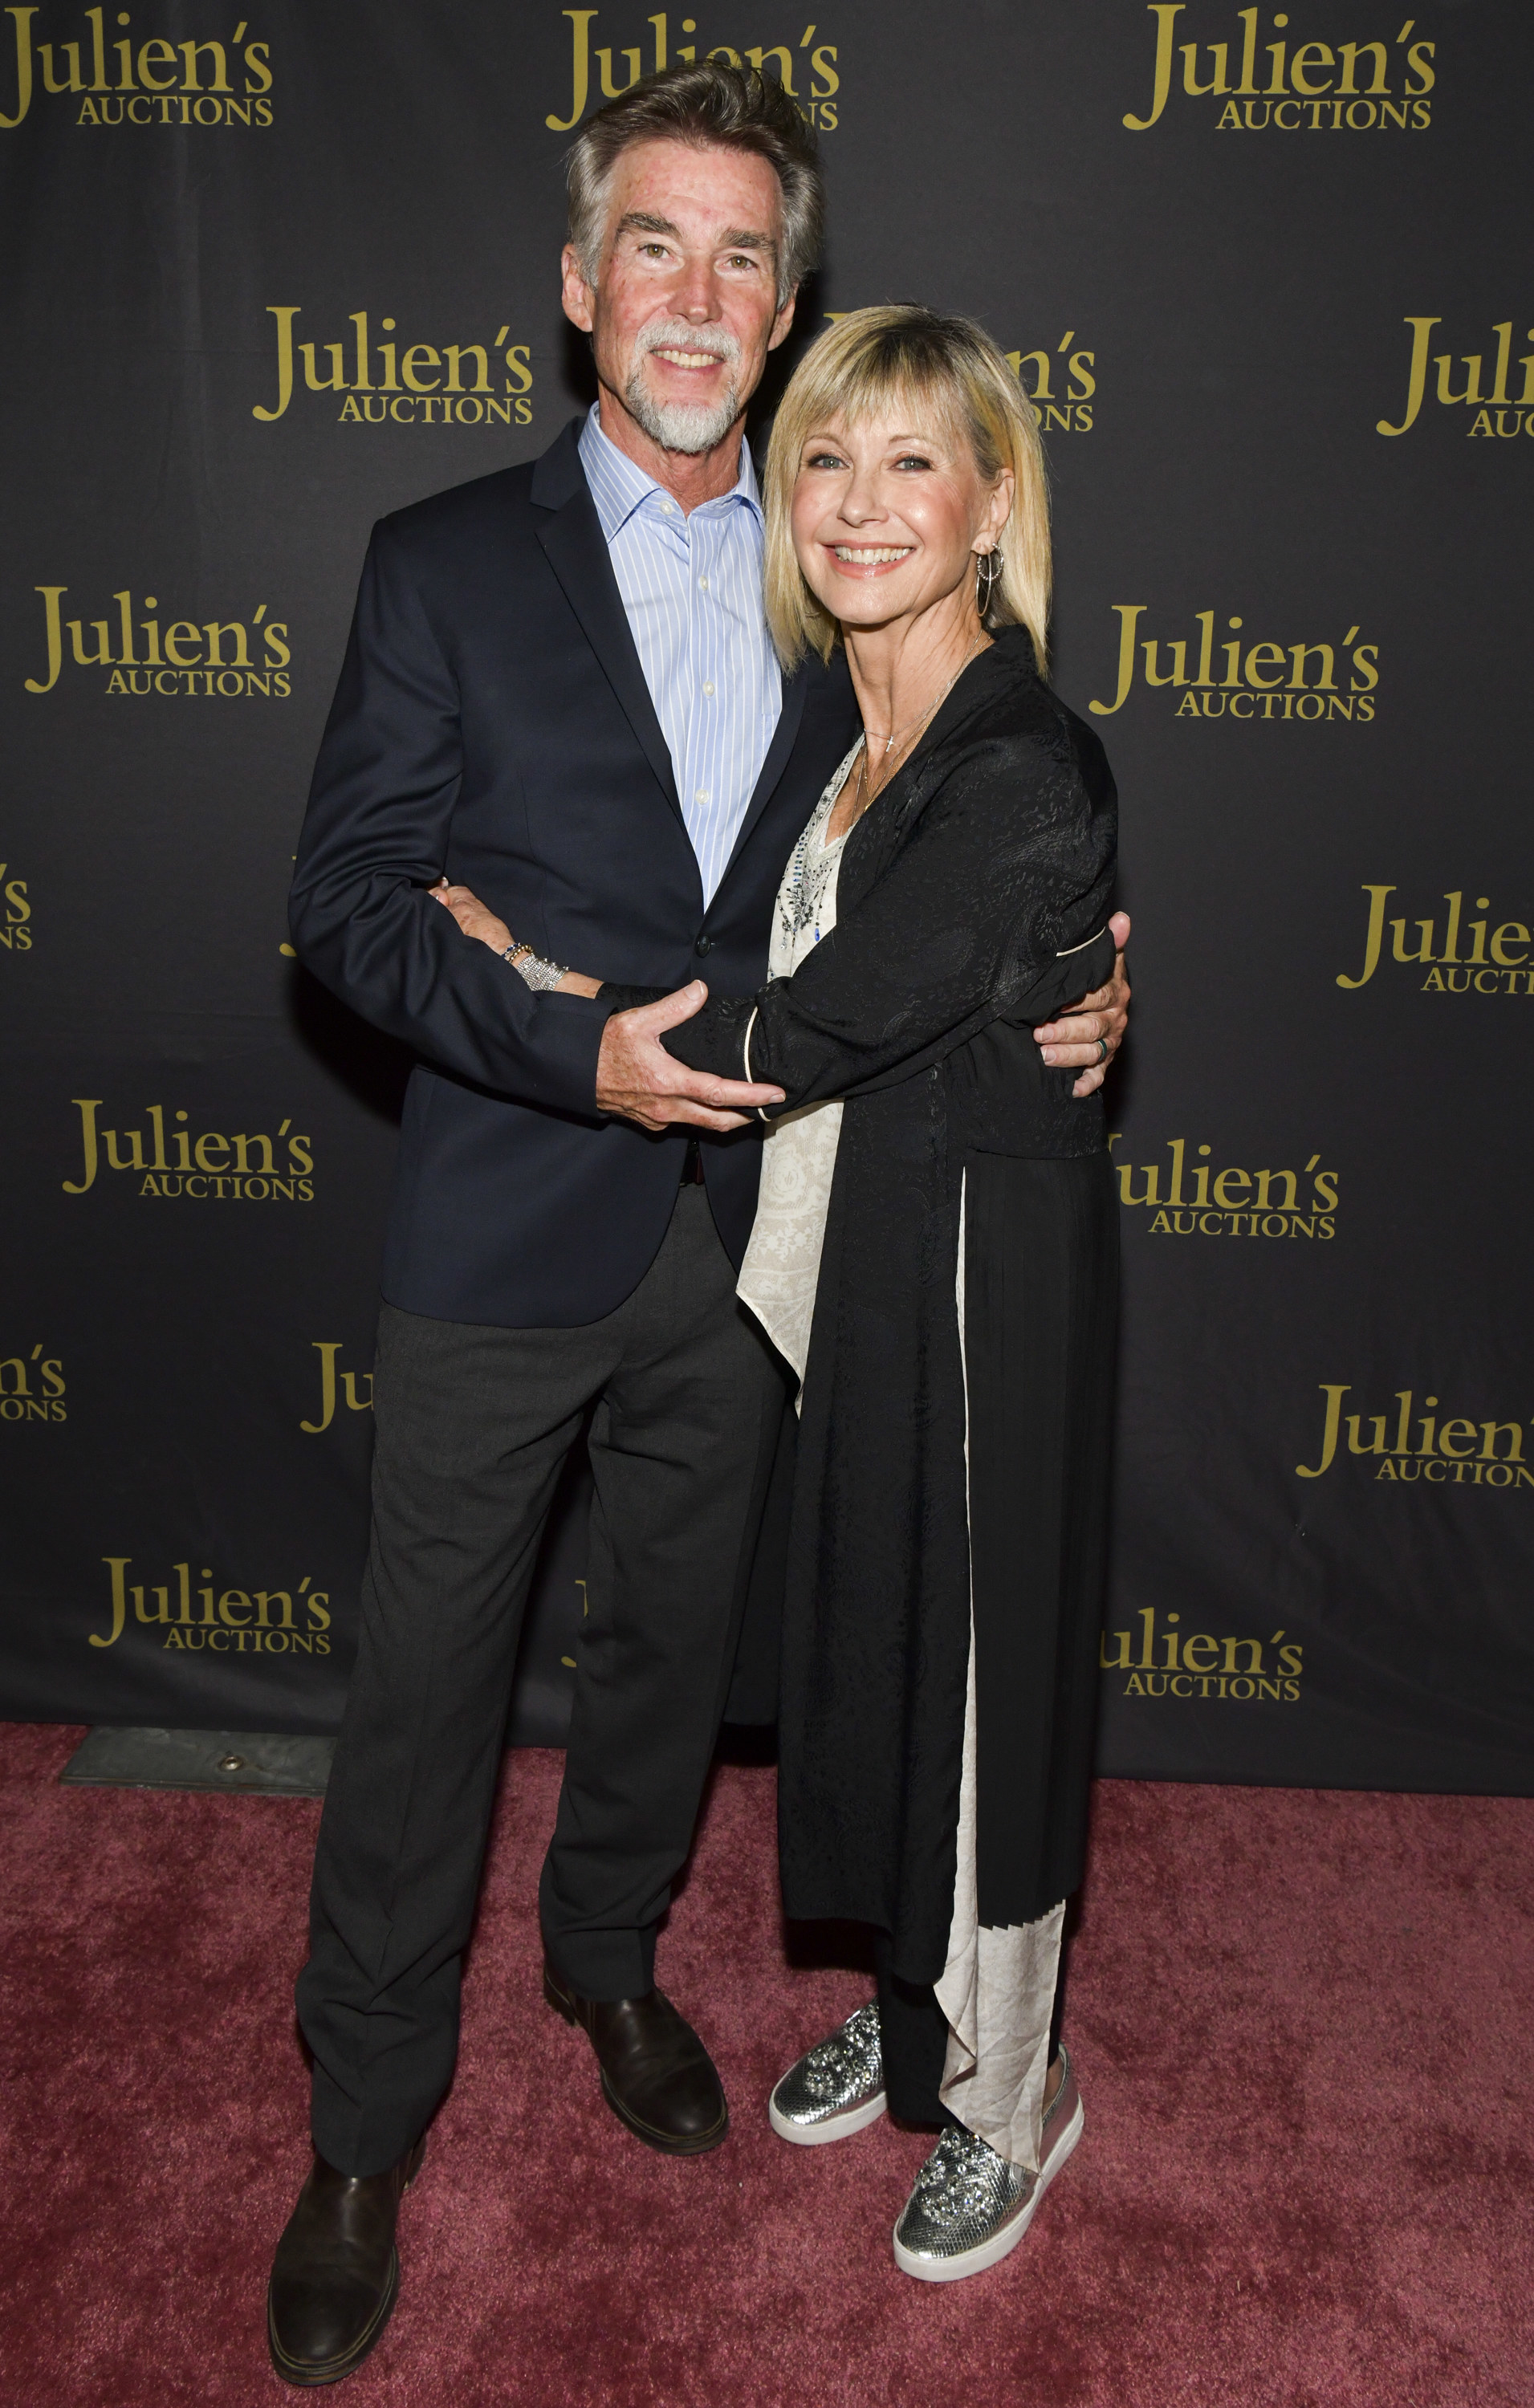 Olivia Newton-John and John Easterling pose at a VIP reception for the Property of Olivia Newton-John Auction Event at Julien&#x27;s Auctions in 2019